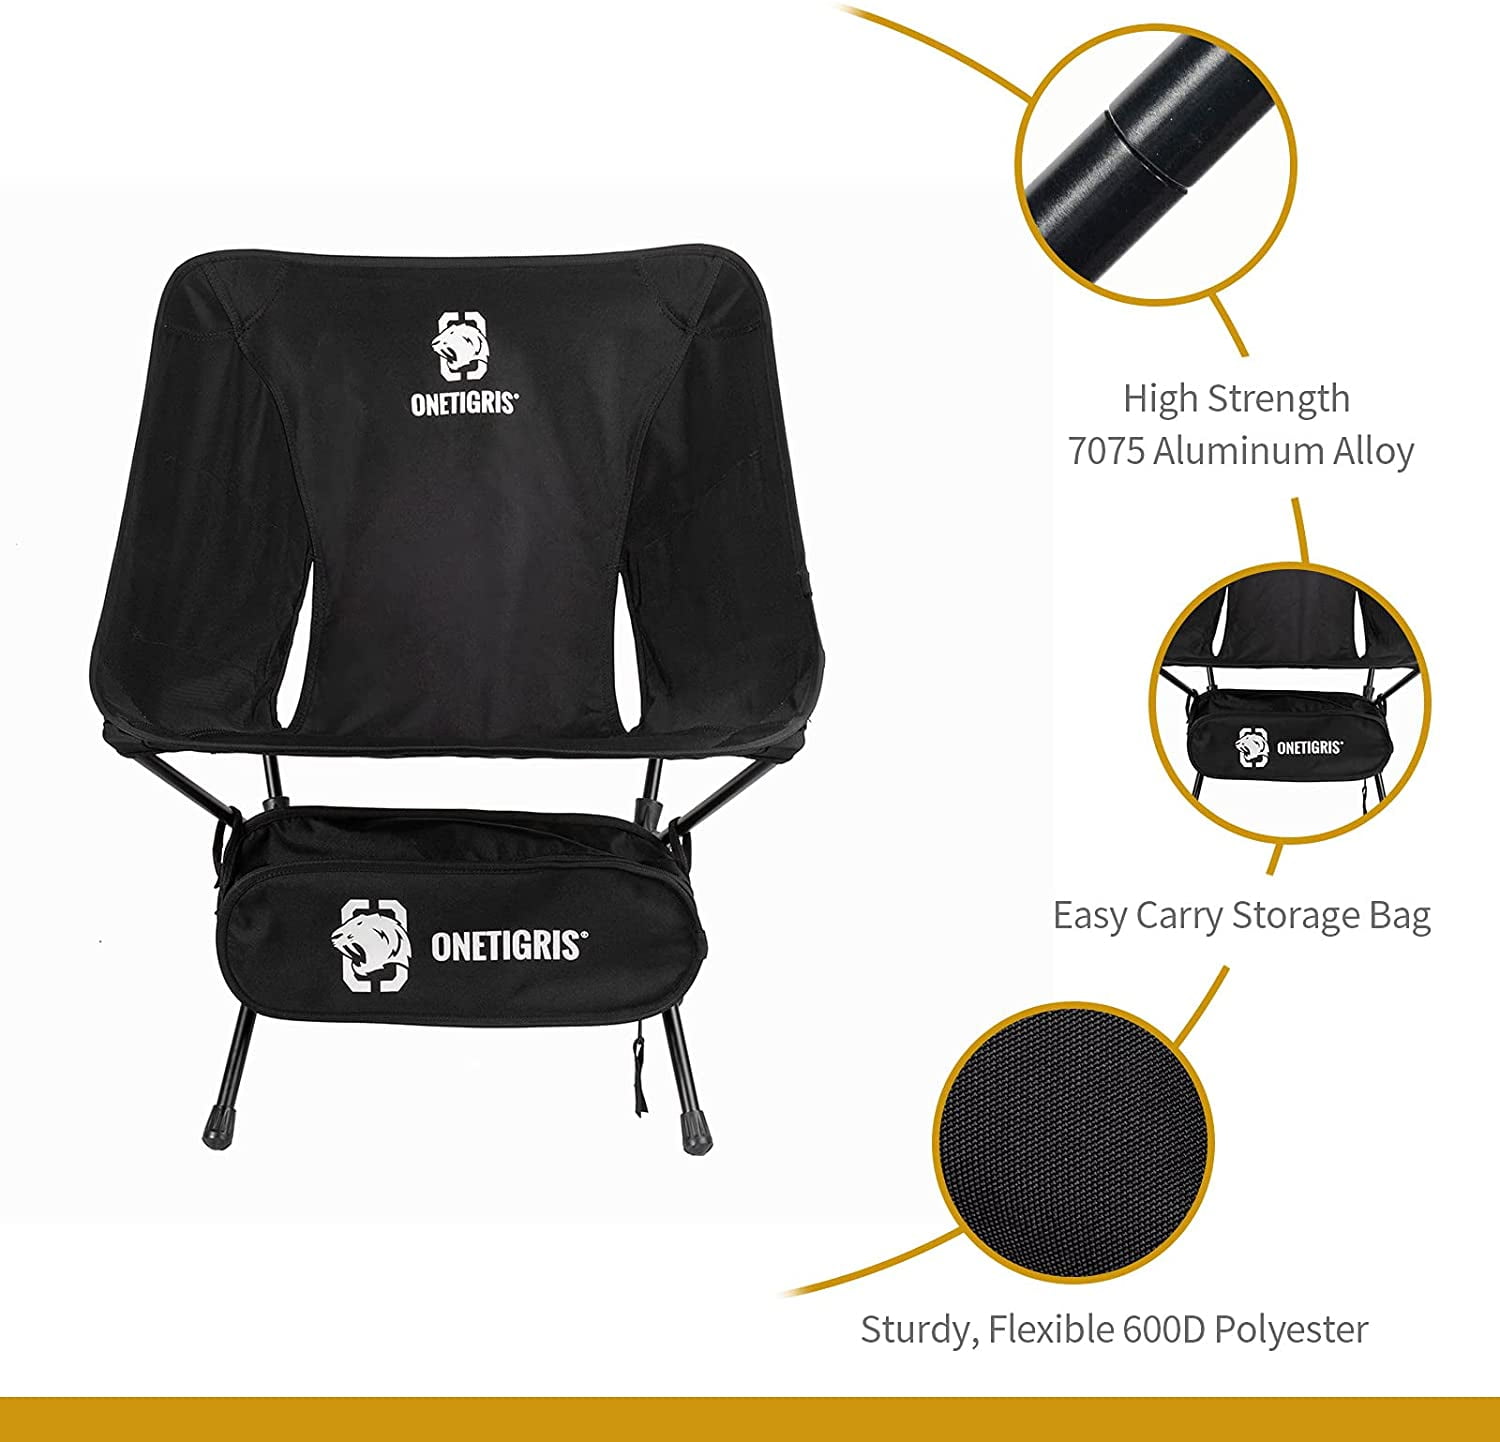 330 lbs Capacity Lightweight Compact Portable Folding Chair for Hiking Travel Beach Picnic OneTigris Multicam Camping Backpacking Chair High Back 